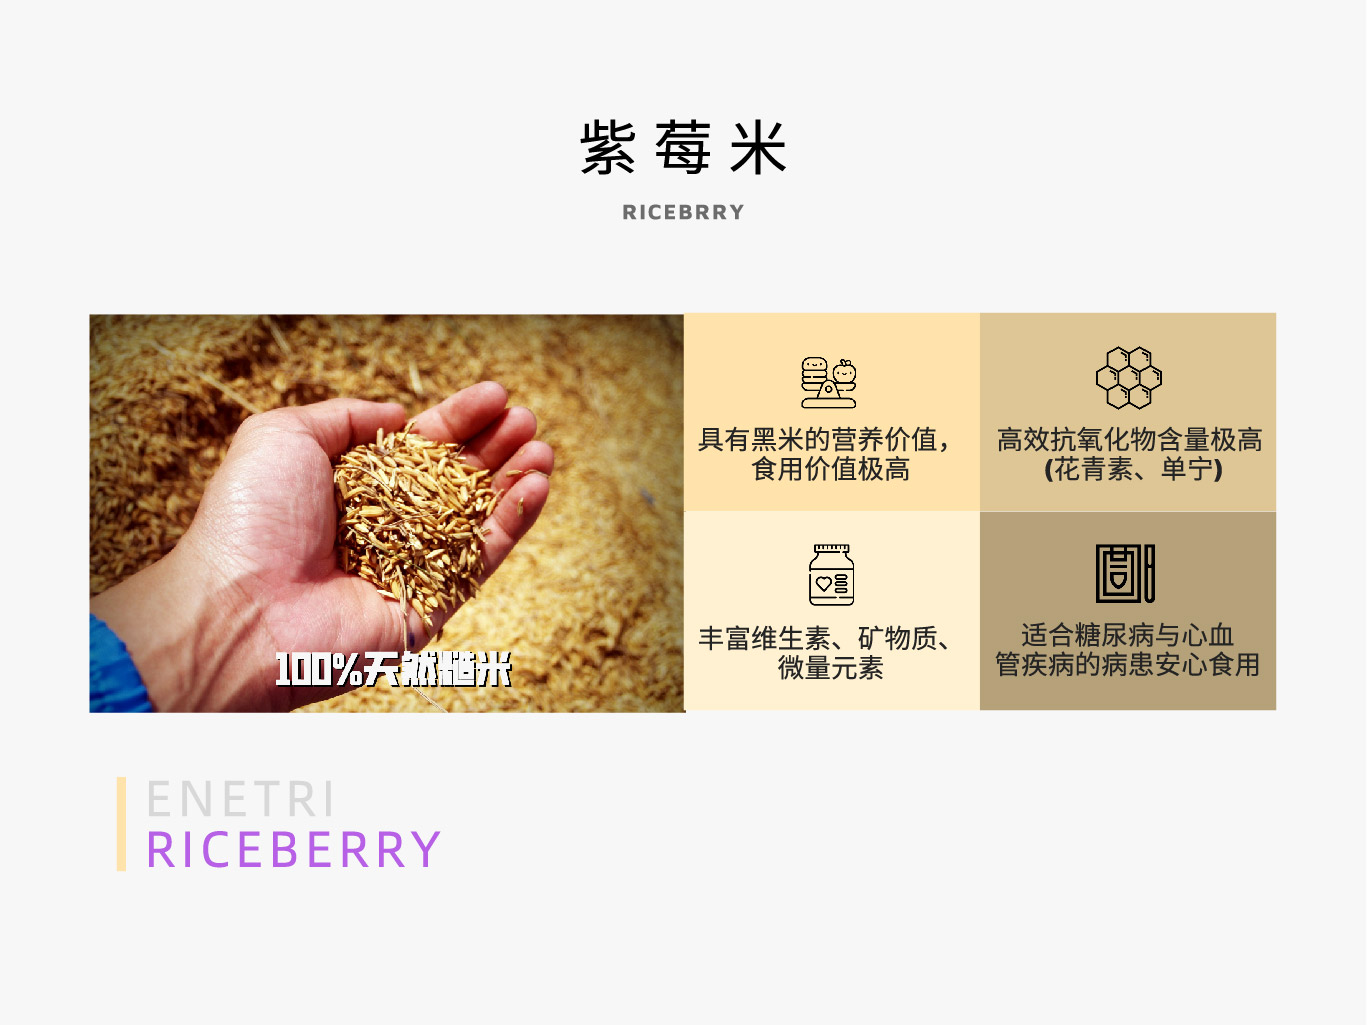 Riceberry product details